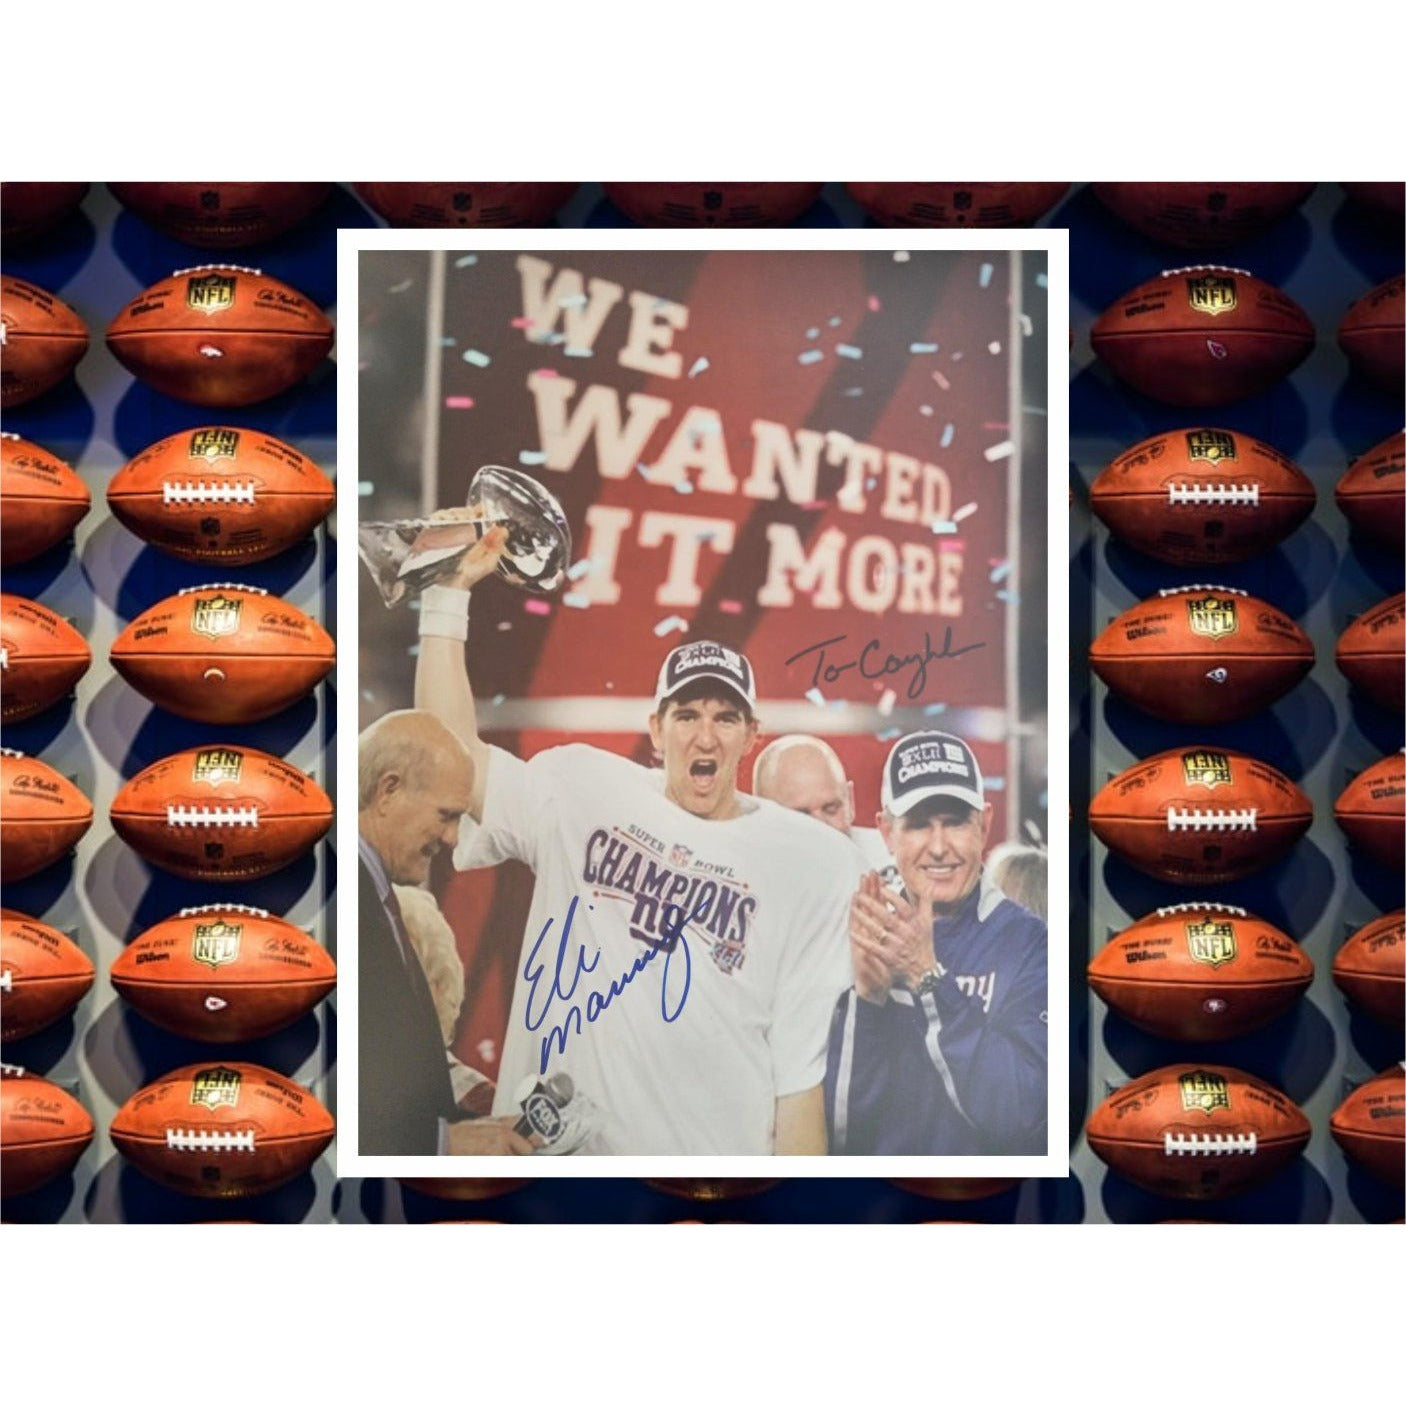 Eli Manning and Tom Coughlin New York Giants 11 x 14 photo signed